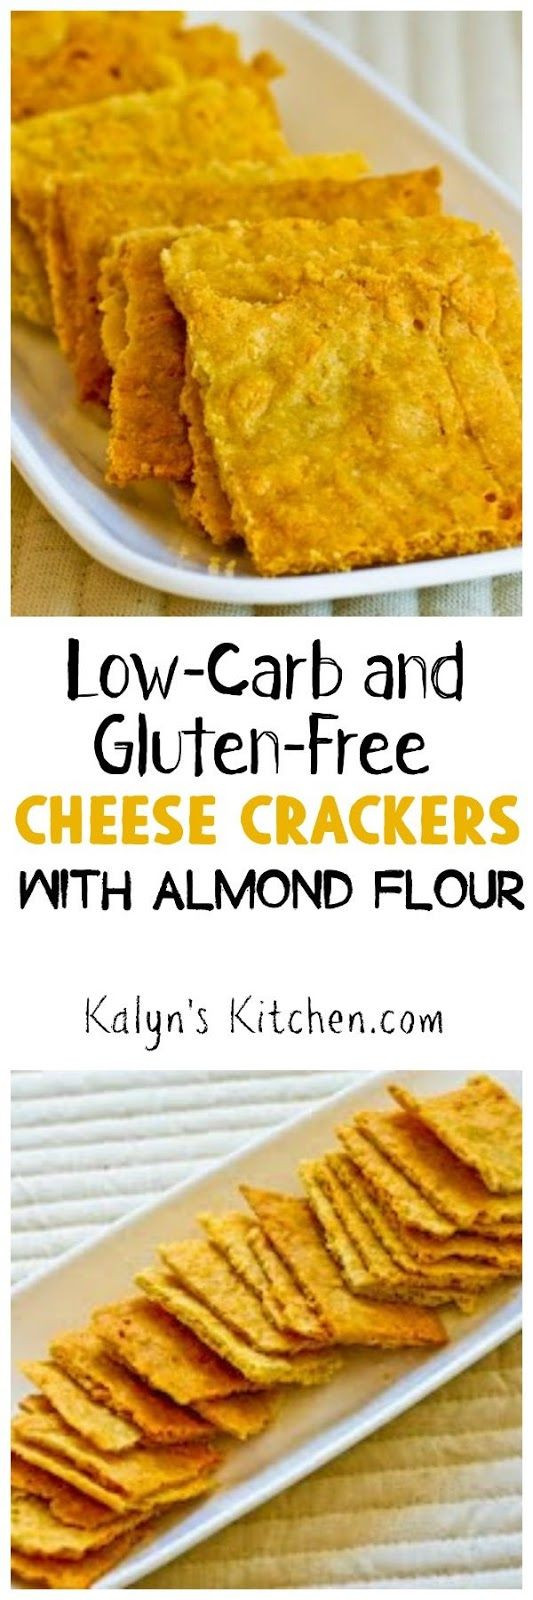 Low Carb Chips And Crackers
 low carb cracker recipe almond flour